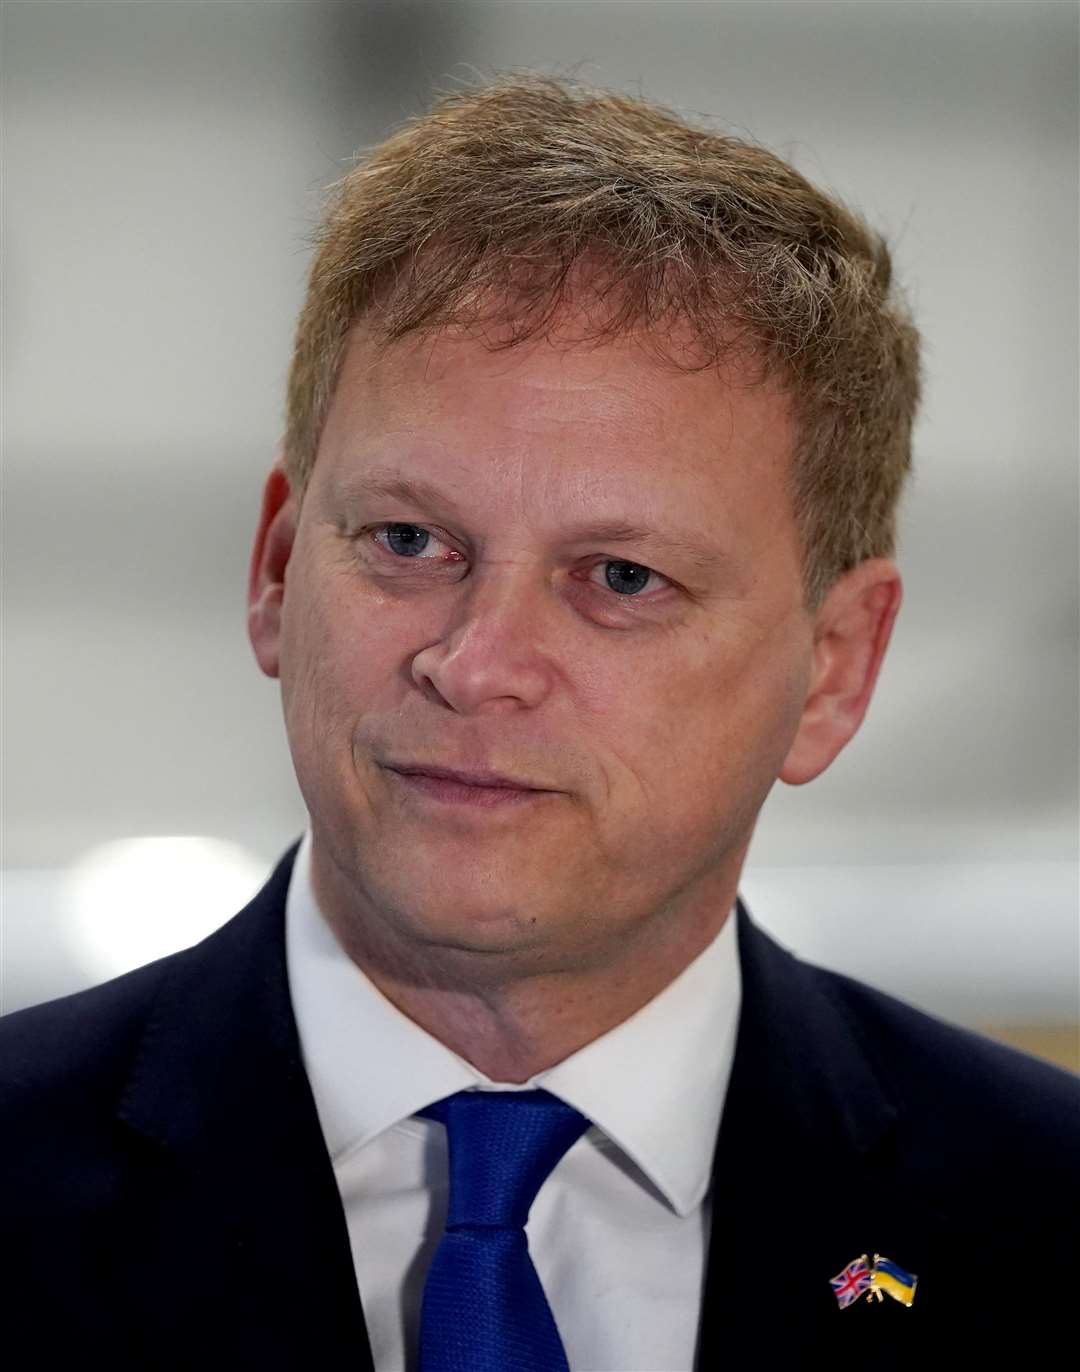 Transport Secretary Grant Shapps met with senior leaders from the aviation industry after chaotic scenes at airports (Gareth Fuller/PA)